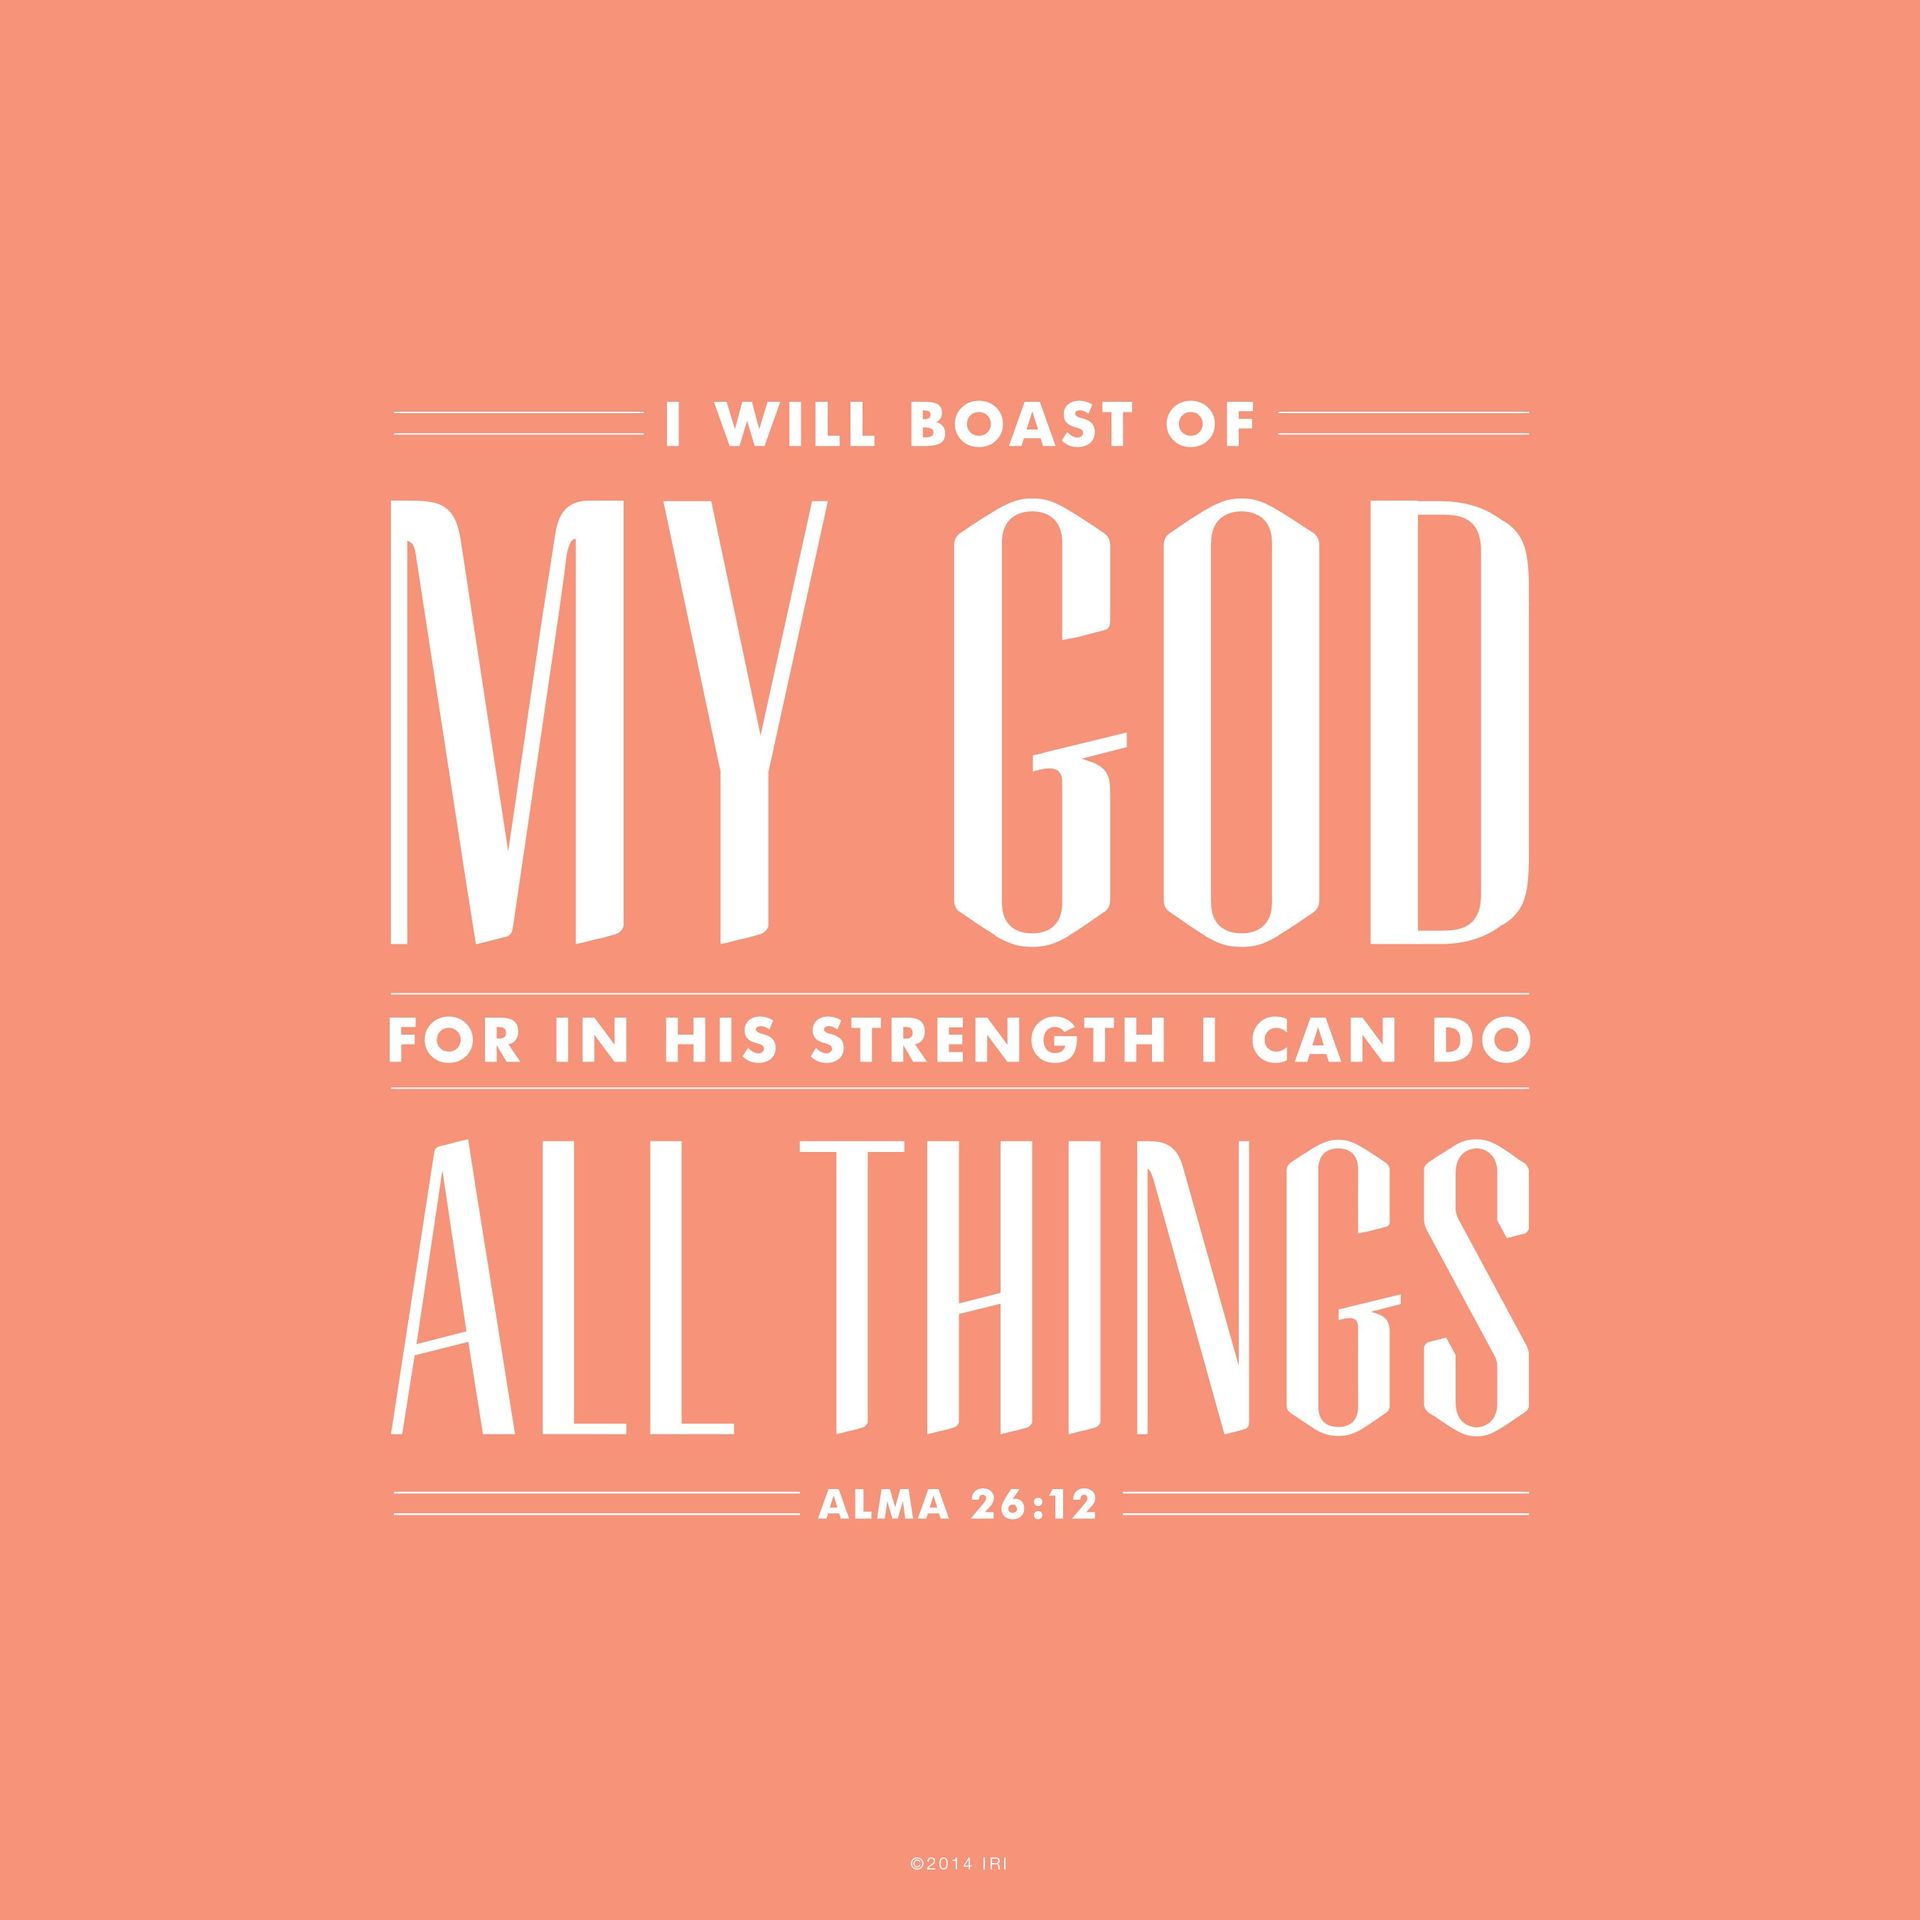 “I will boast of my God, for in his strength I can do all things.”—Alma 26:12